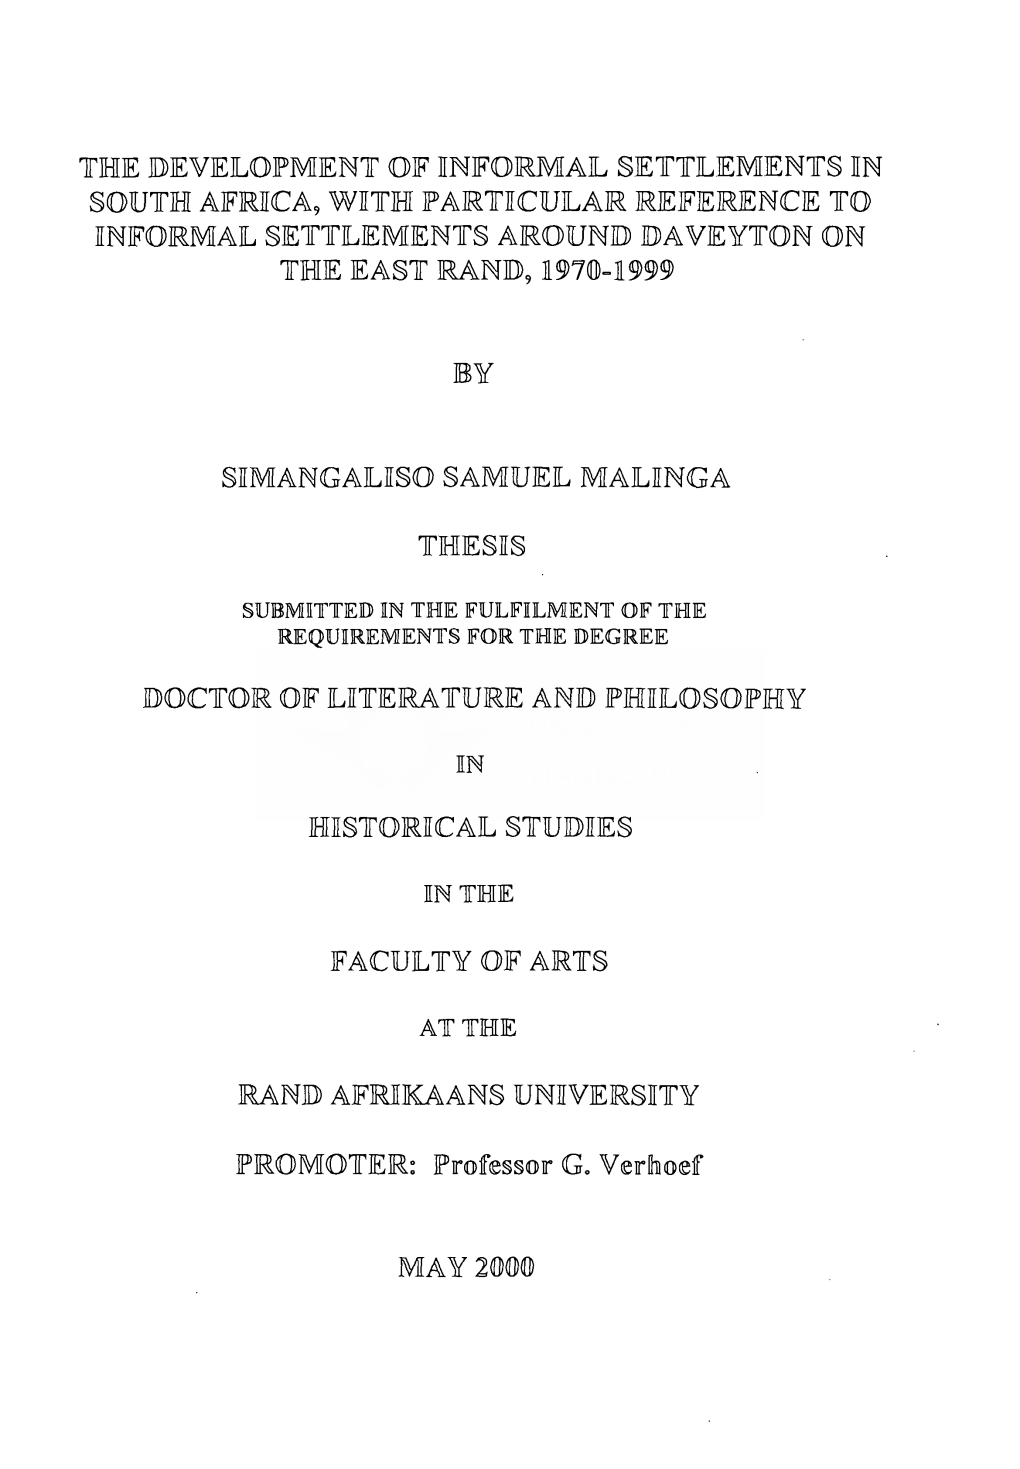 The Development of Informal Settlements in South Africa, with Particular Reference to Informal Settlements Around Daveyton on the East Rand, 19704999